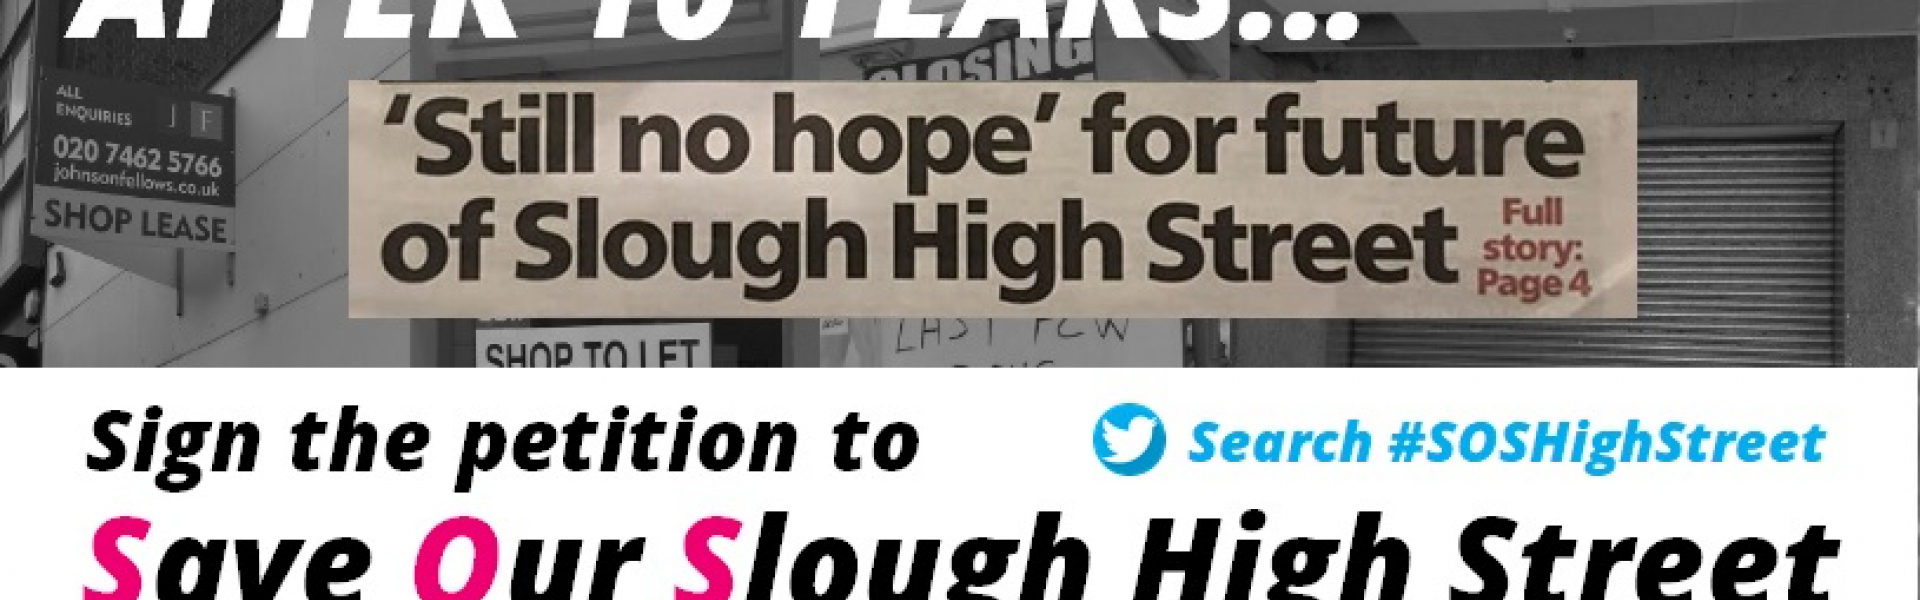 Save Our Slough High Street Petition